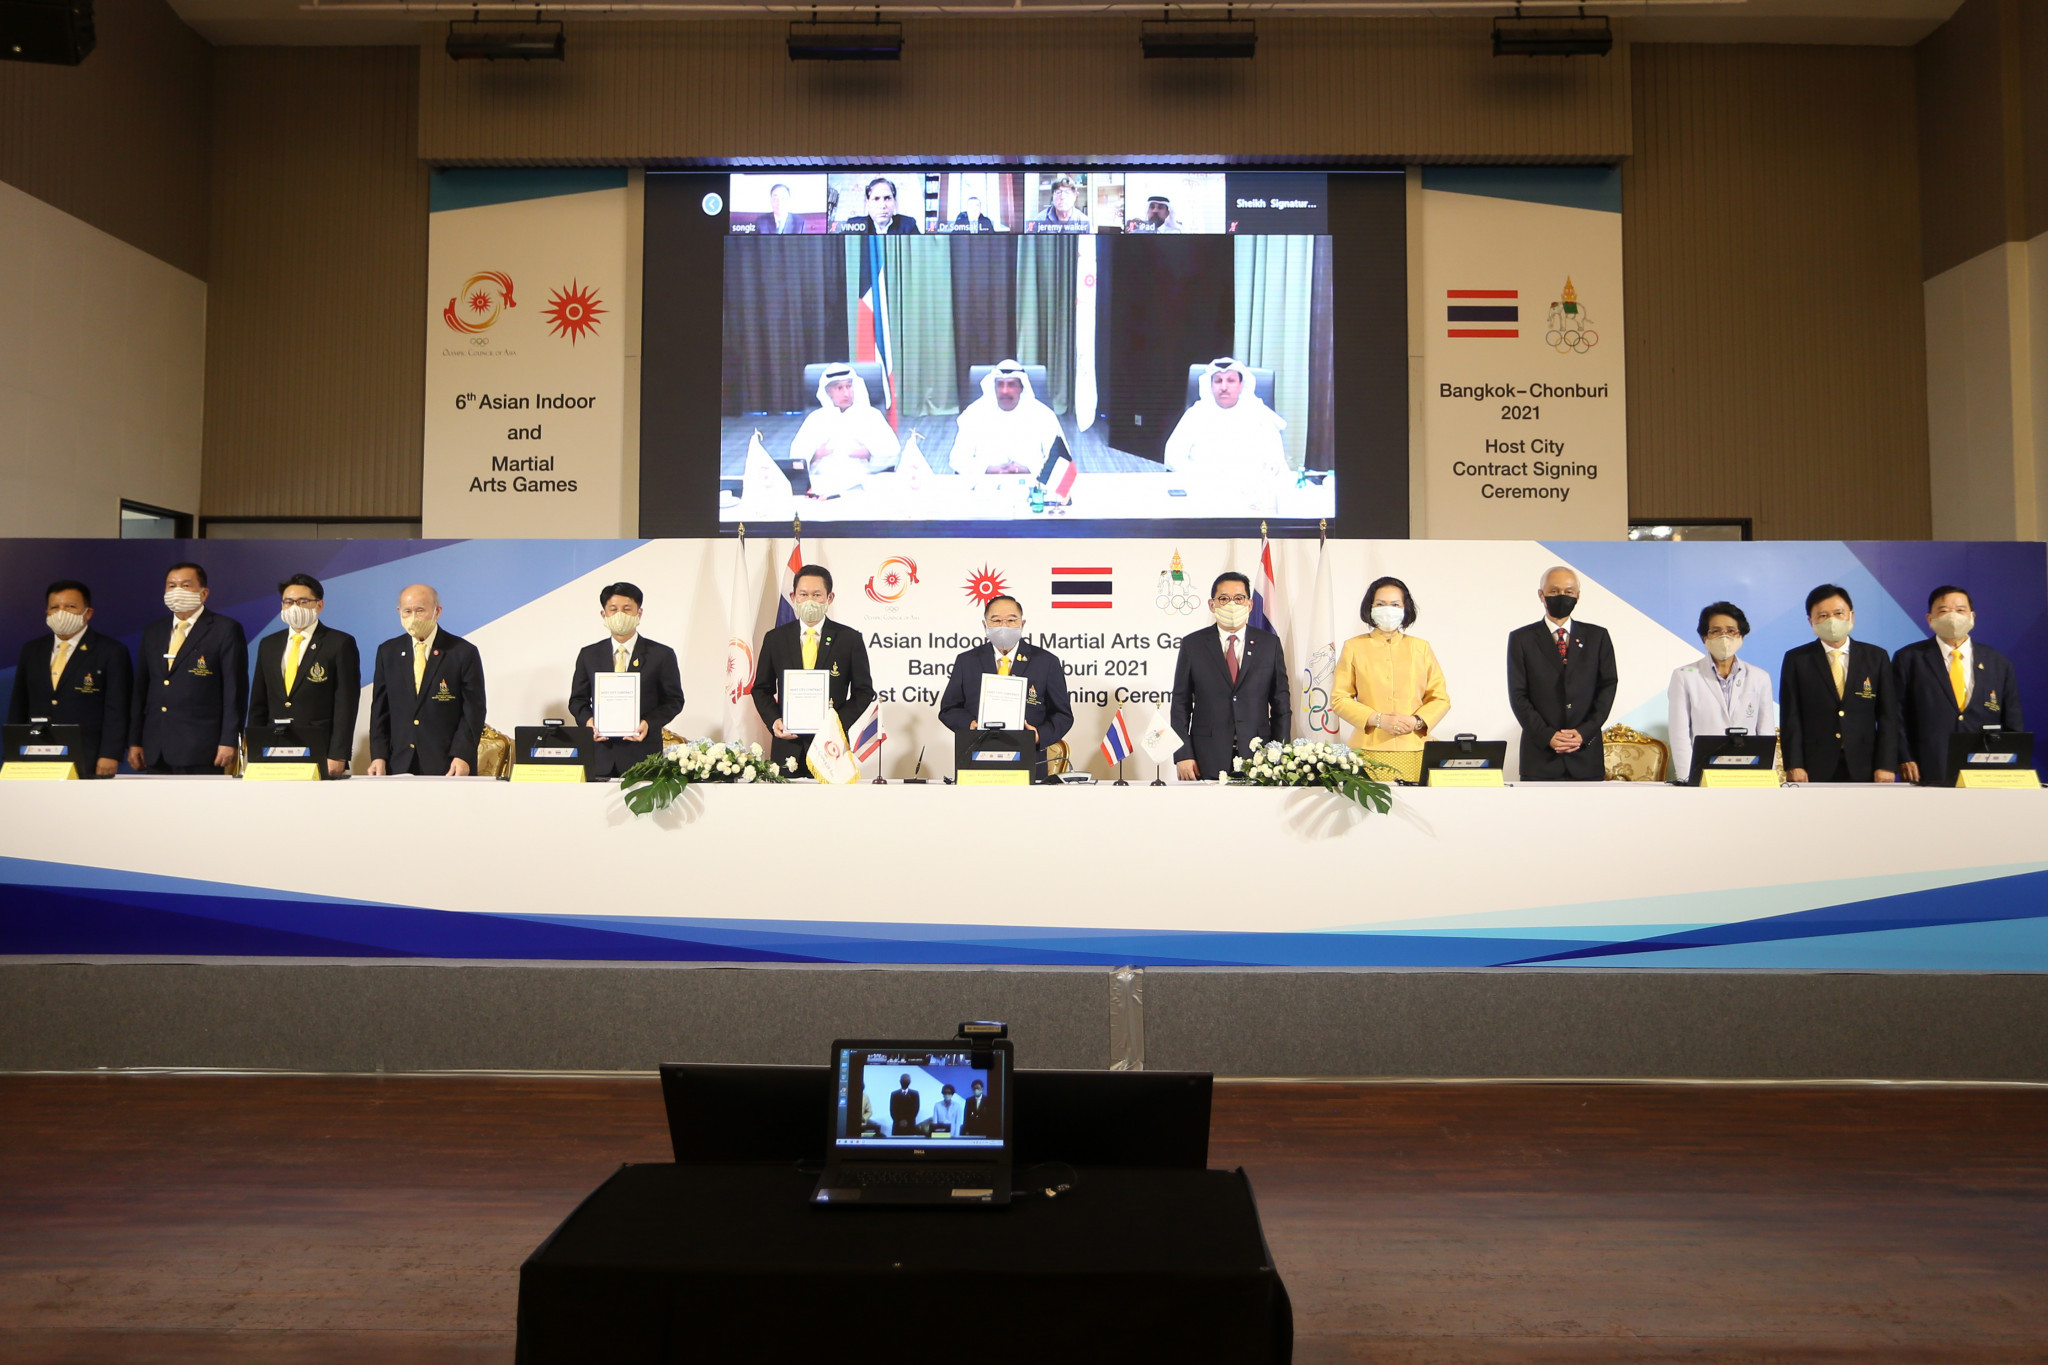 Thailand will host next year's Asian Indoor and Martial Arts Games ©OCA